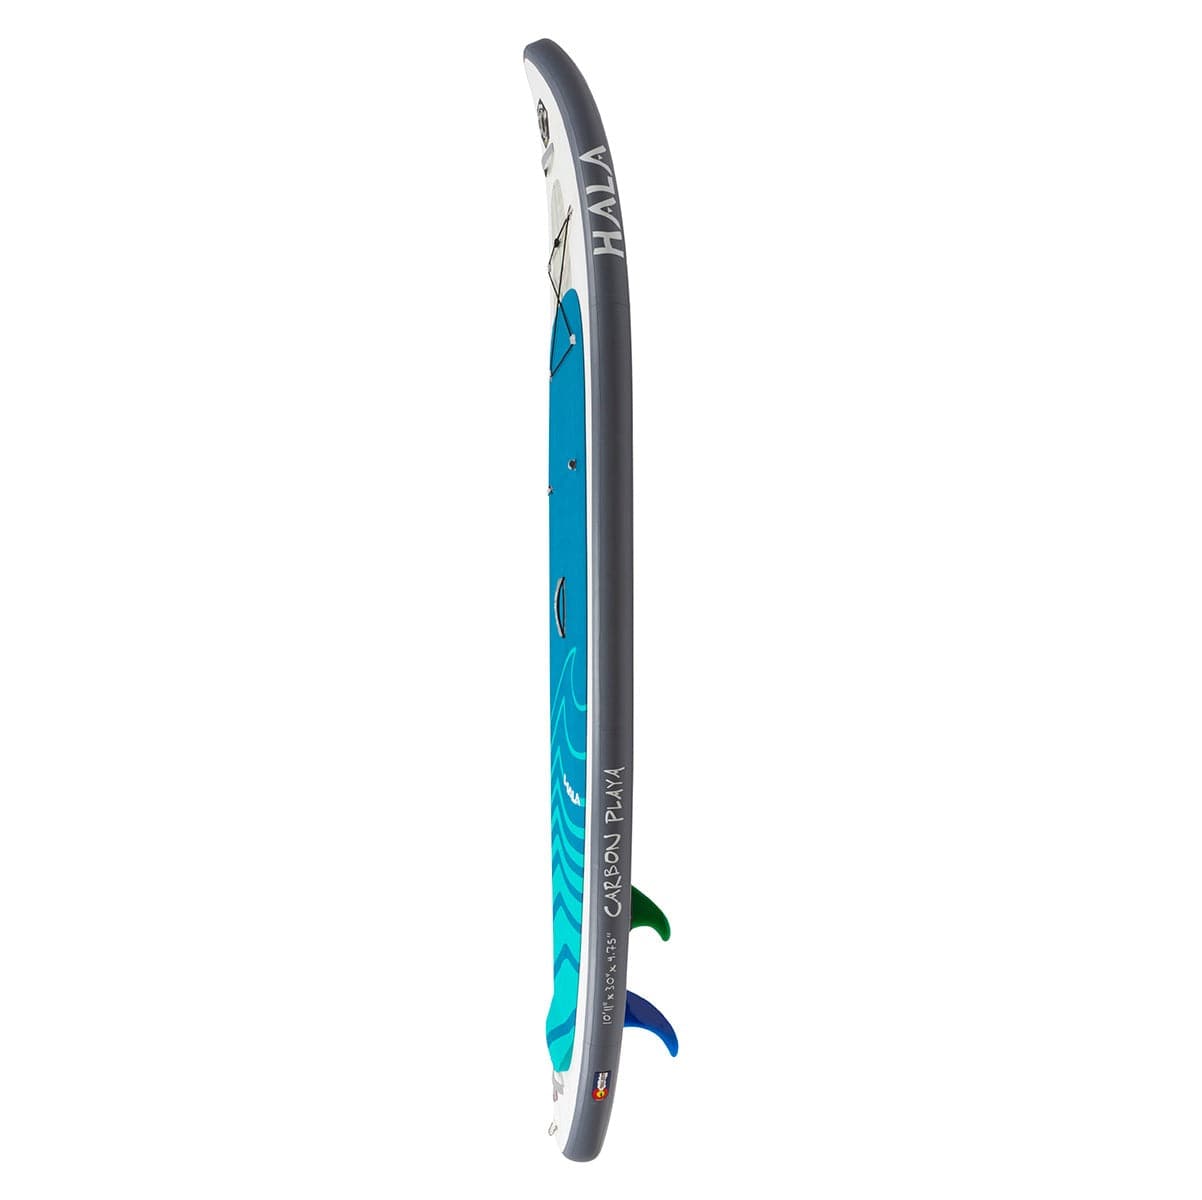 Featuring the Carbon Playa 10'11 Inflatable SUP inflatable sup manufactured by Hala shown here from a third angle.